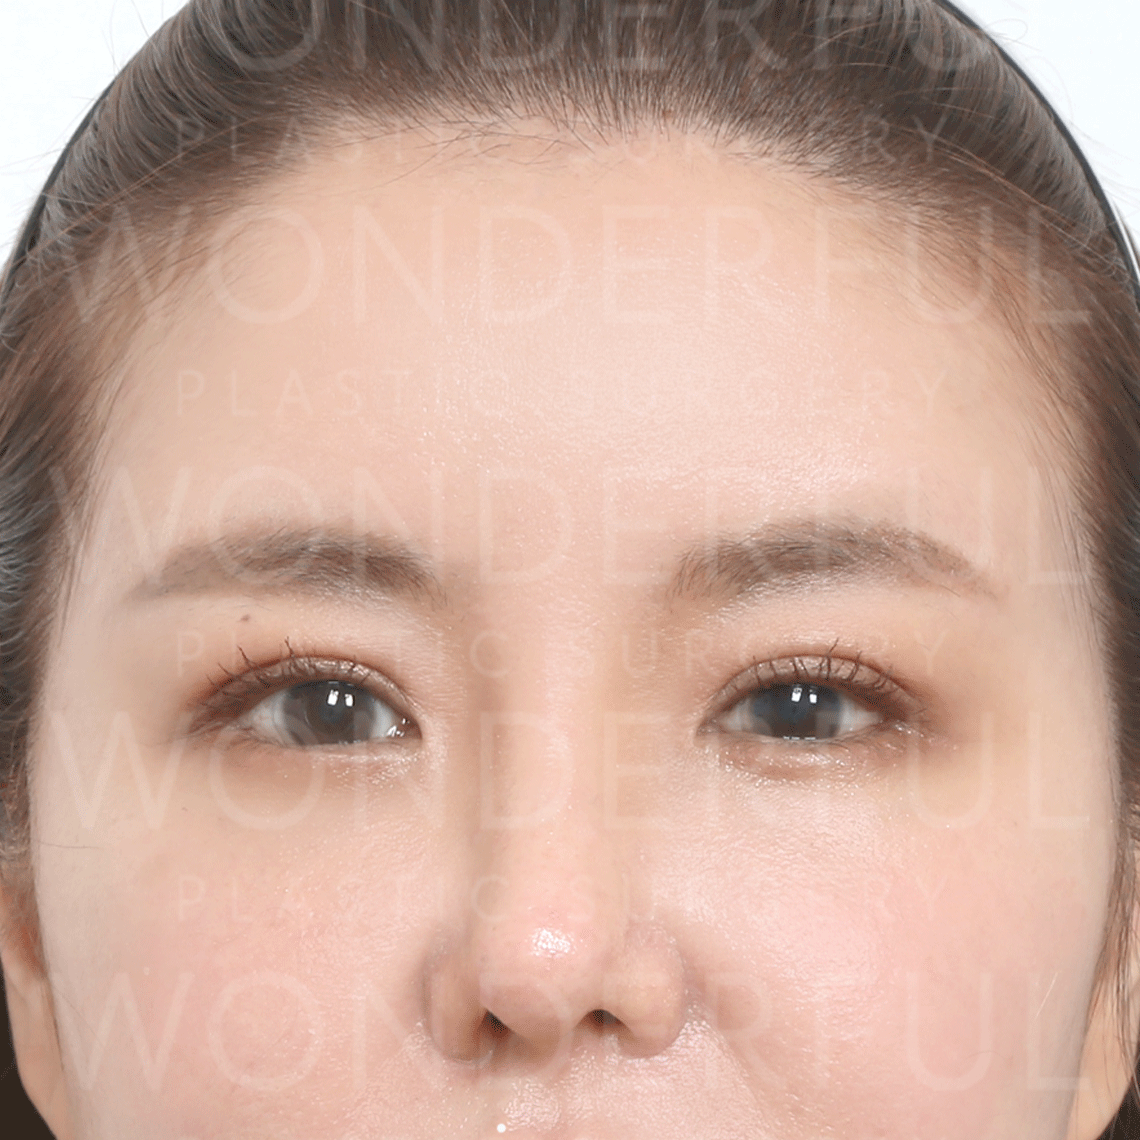 wonderful-plastic-surgery-hospital-korea-endoscopic-fore-head-lift-surgery-before-after-results-after-2